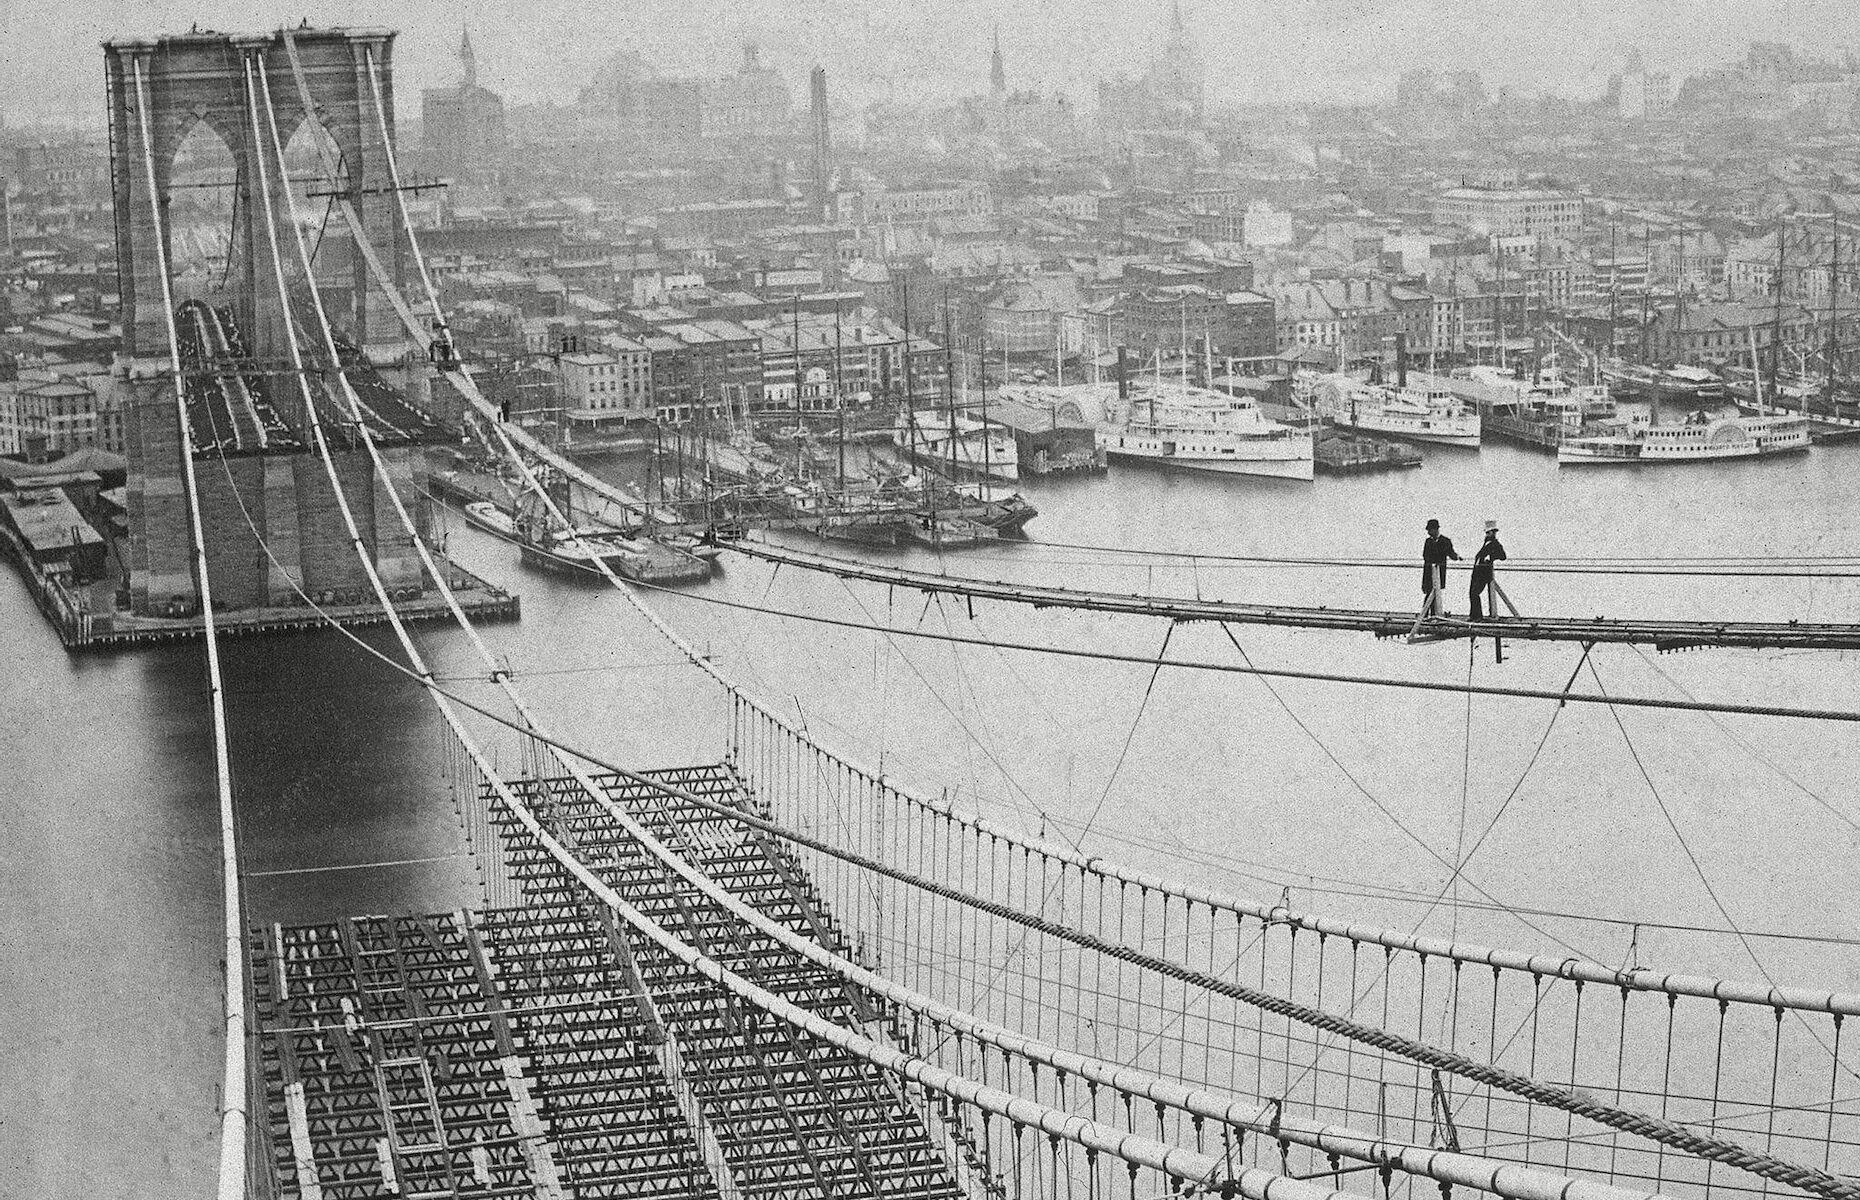 Historical photos of famous monuments under construction